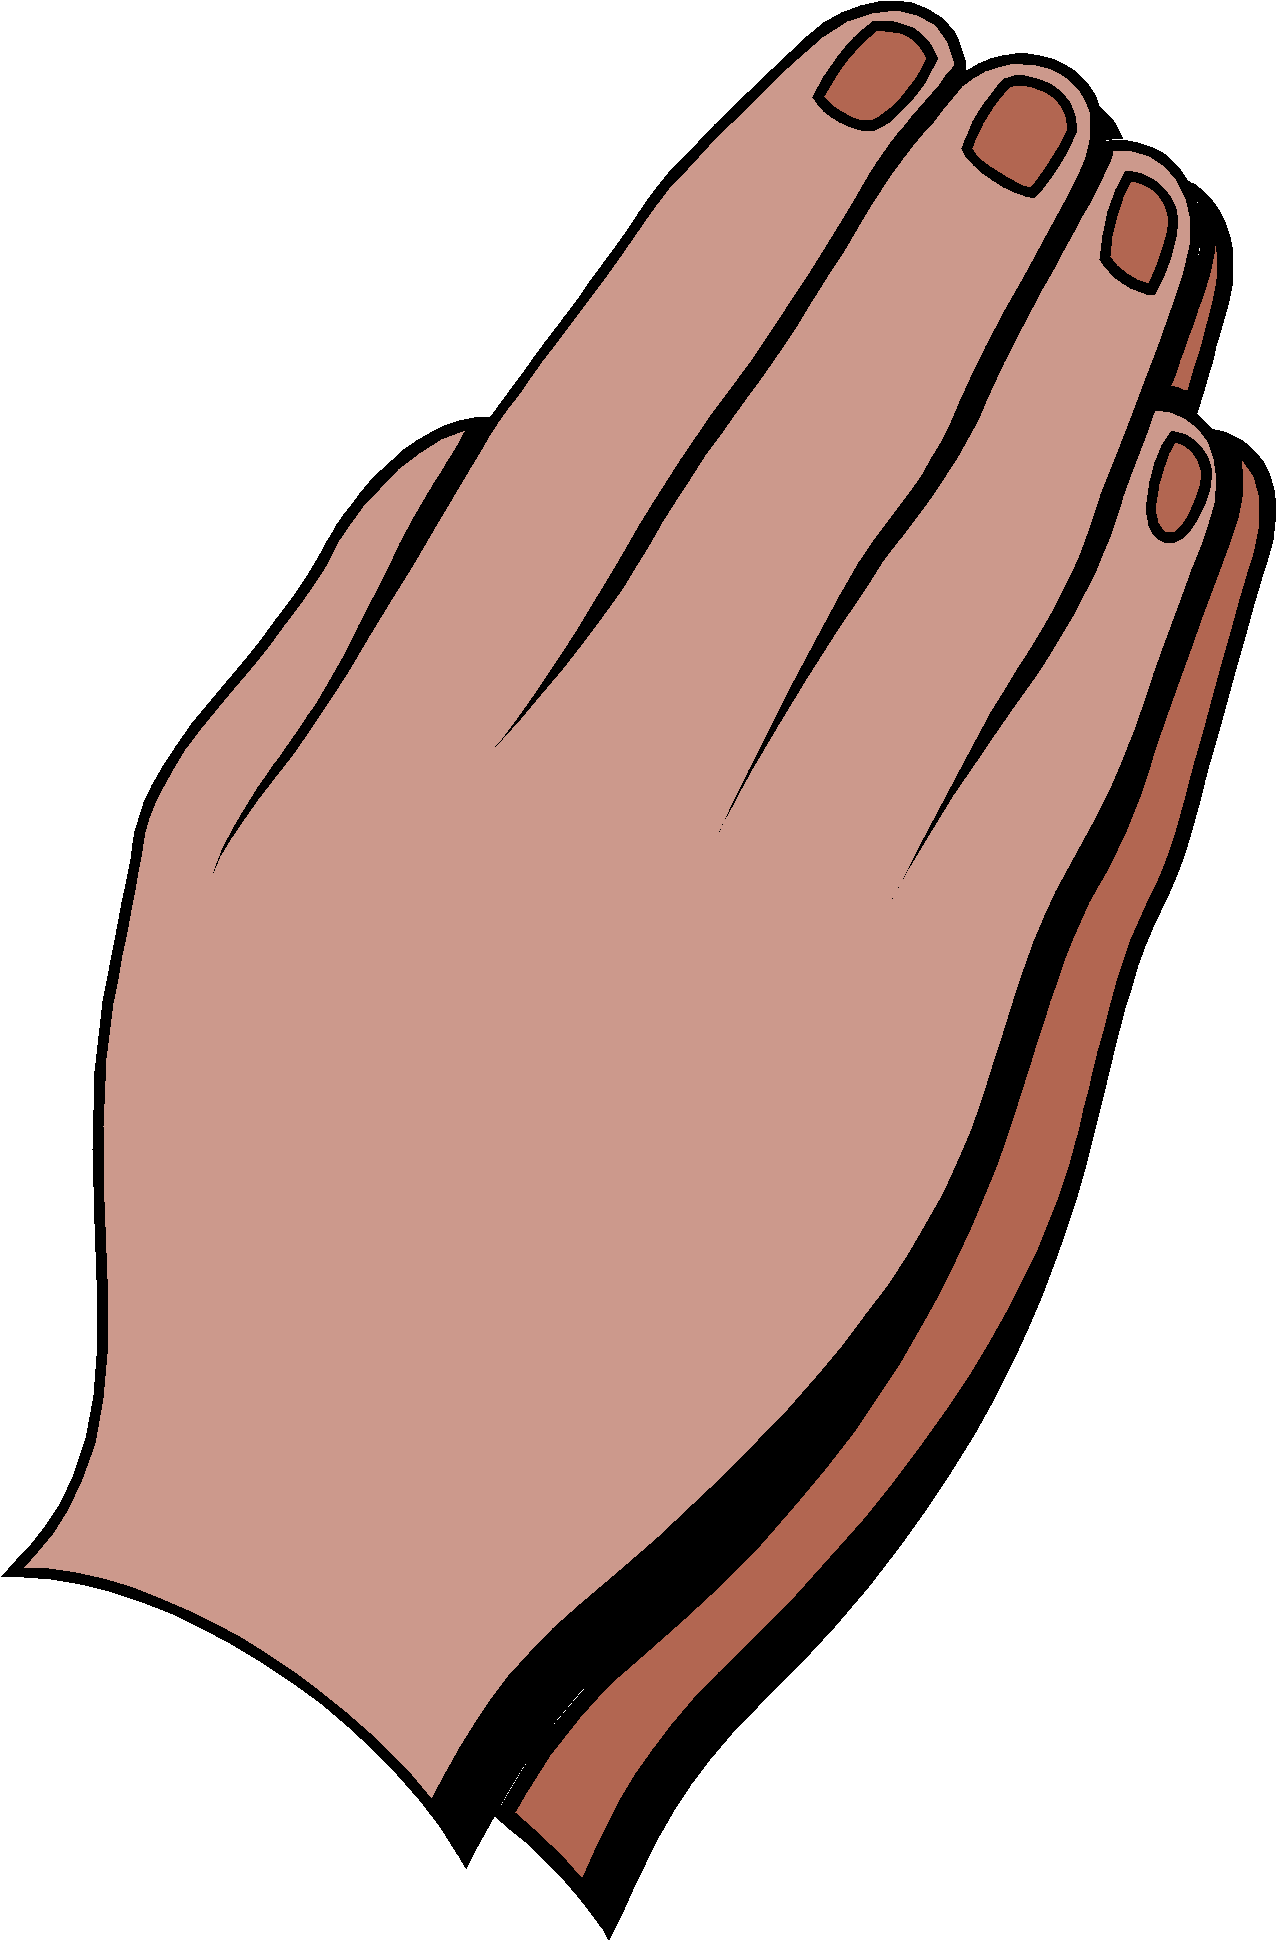 Hands Rubbing Together Clipart (1337x2033)